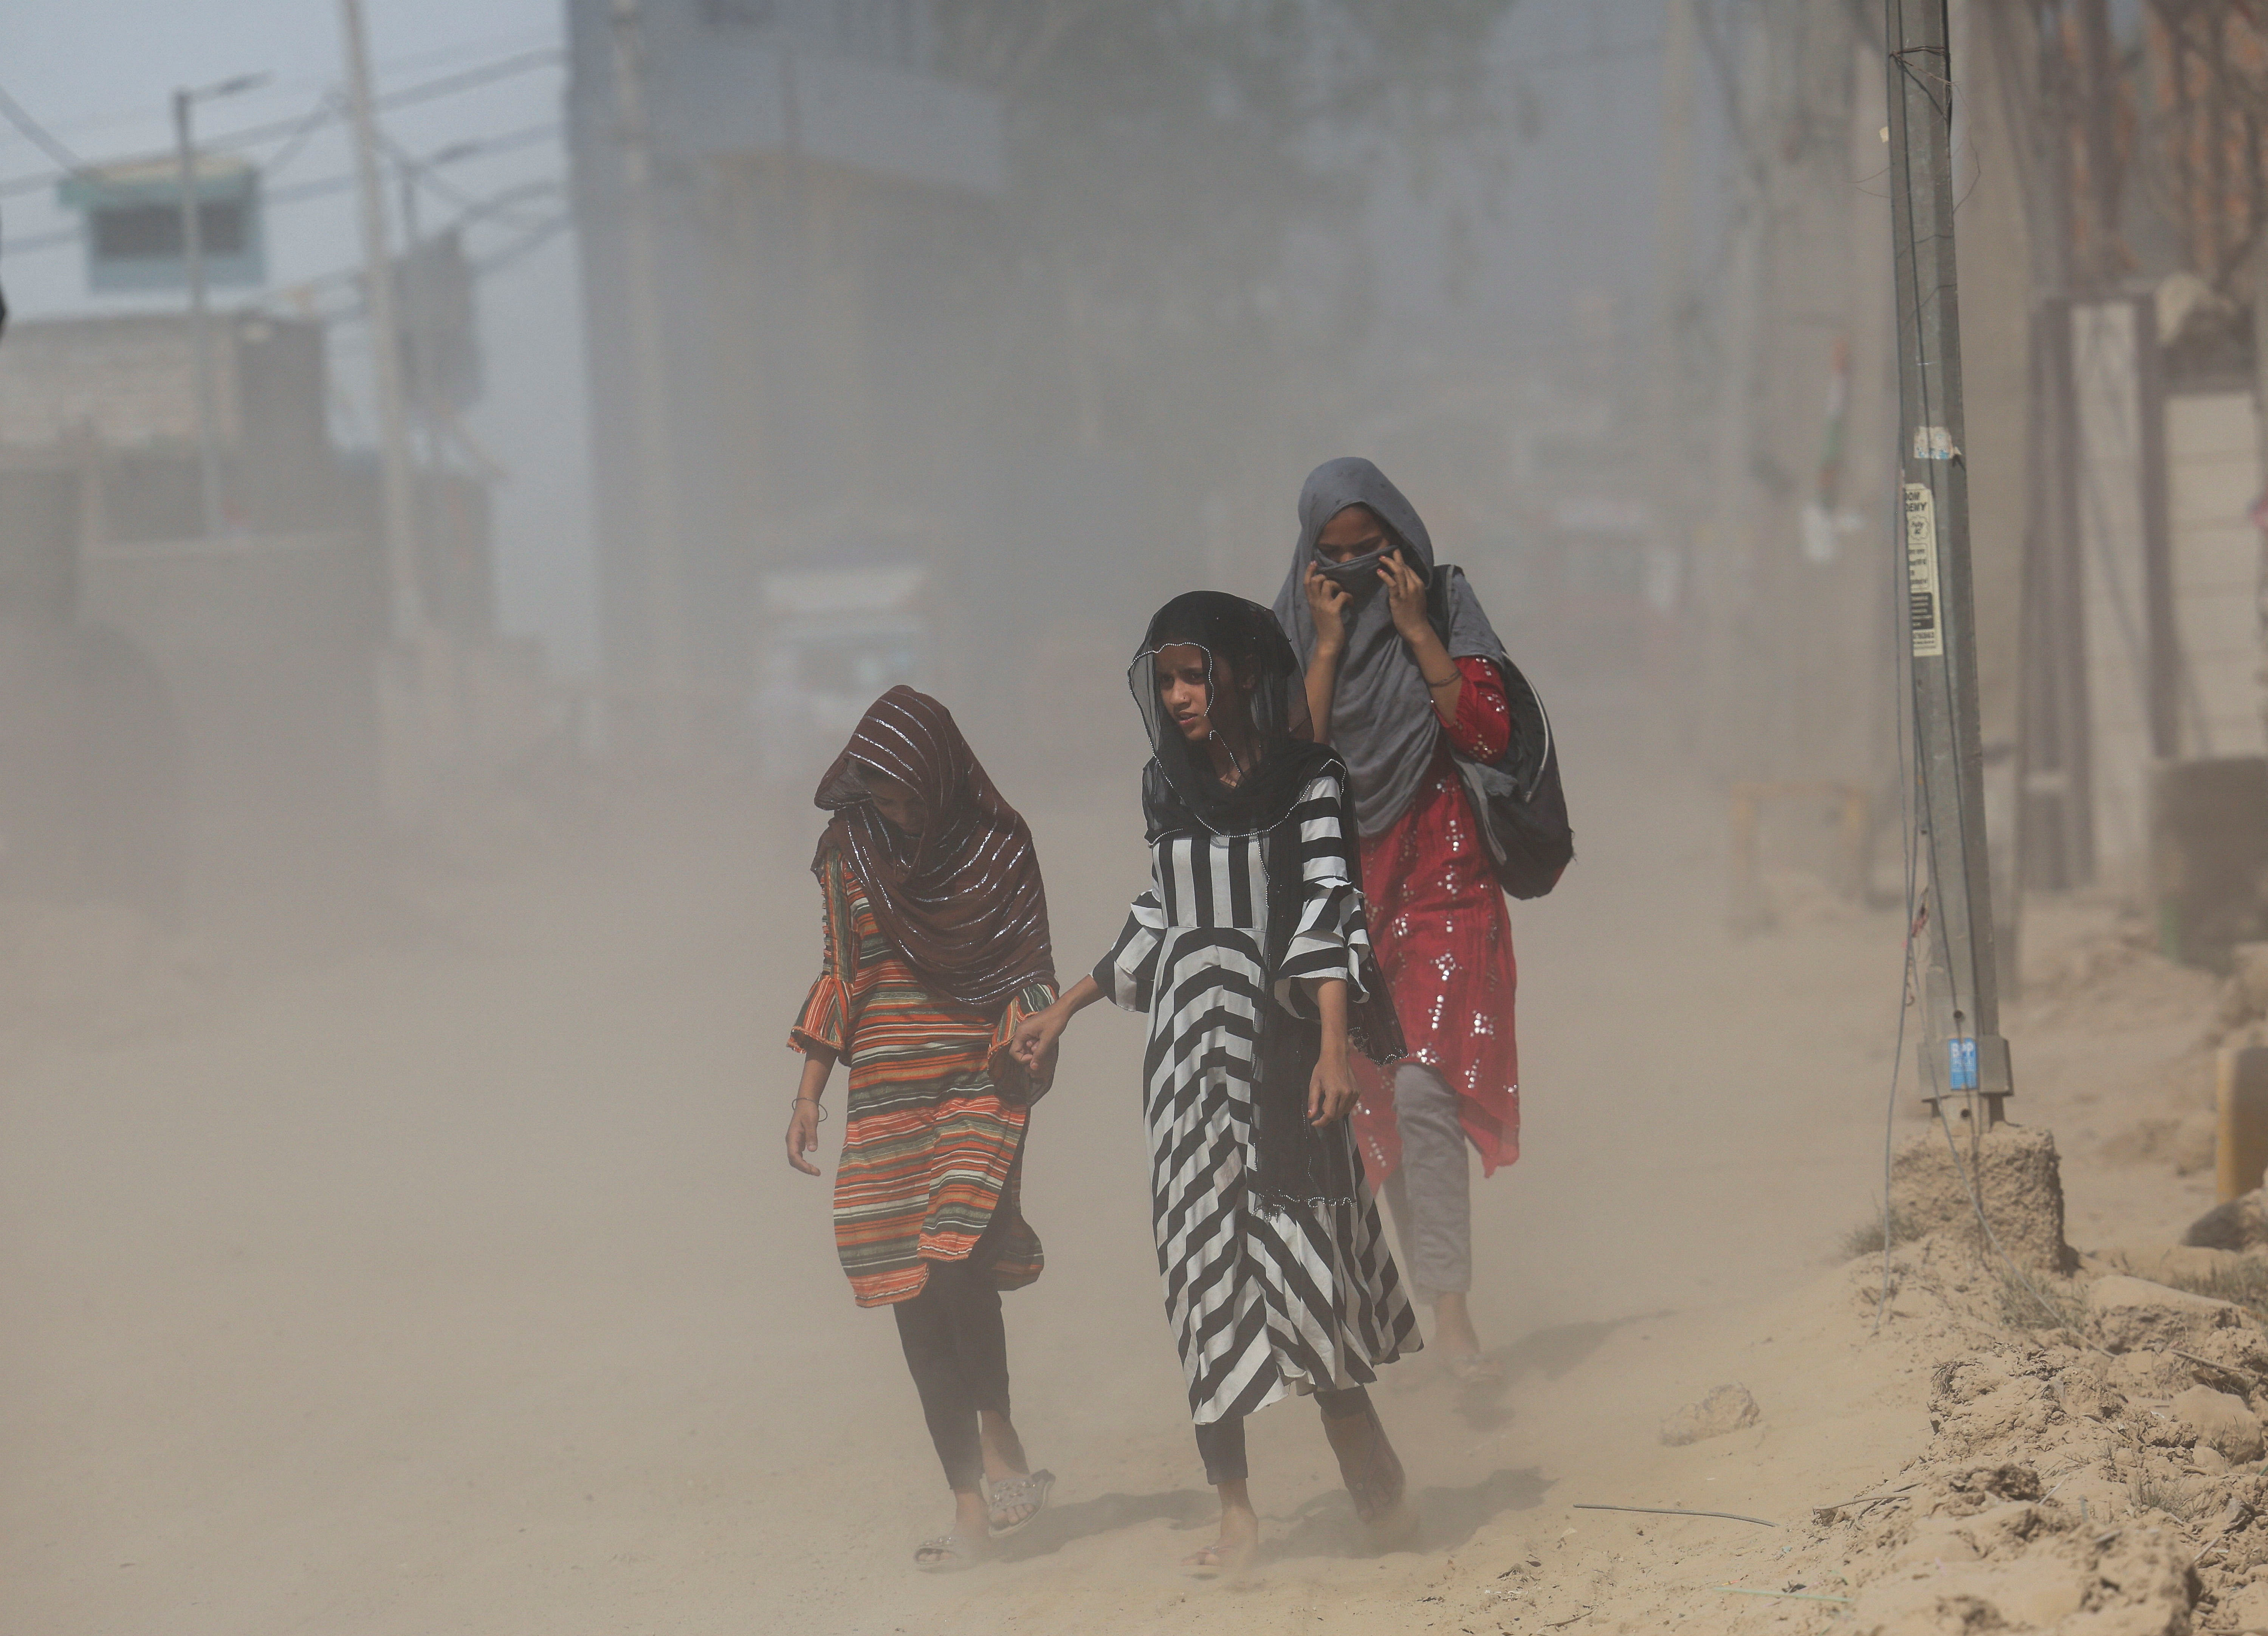 Girls cover their heads as they walk on a street near a landfill site on a hot summer day during a heatwave in New Delhi